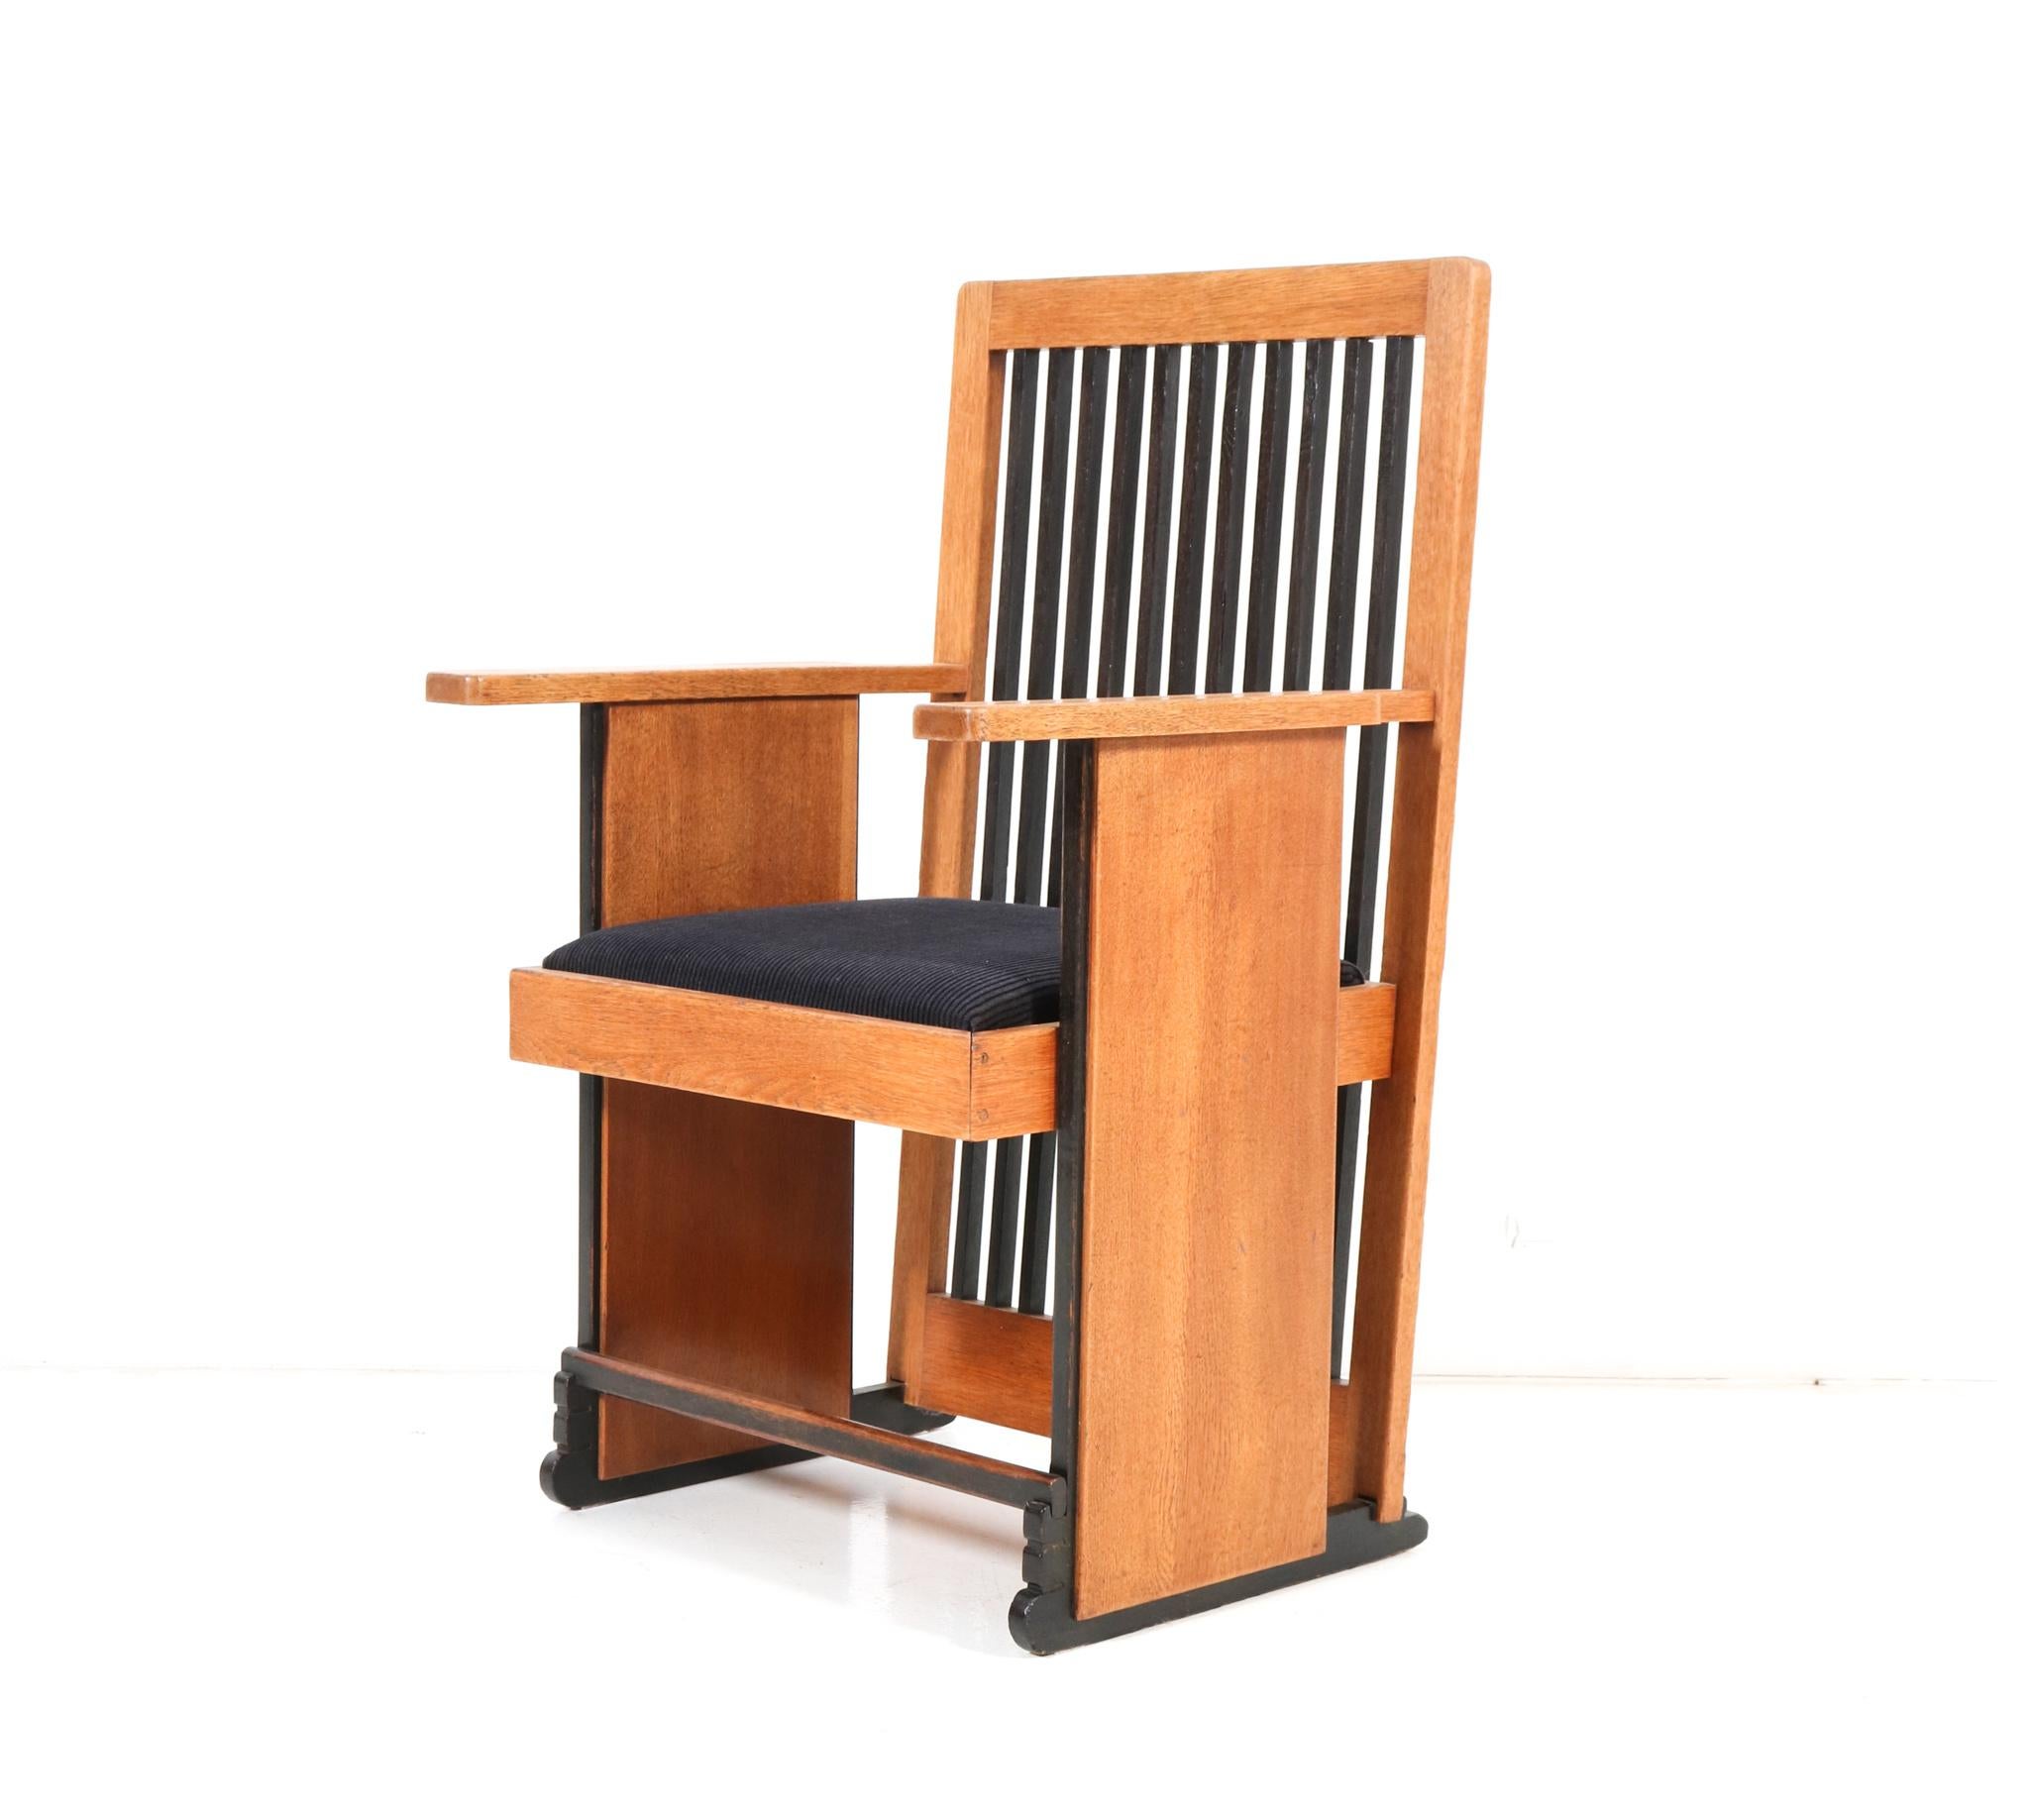  Oak Art Deco Modernist High Back Dining Room Chairs by Architect Caspers, 1920s For Sale 4